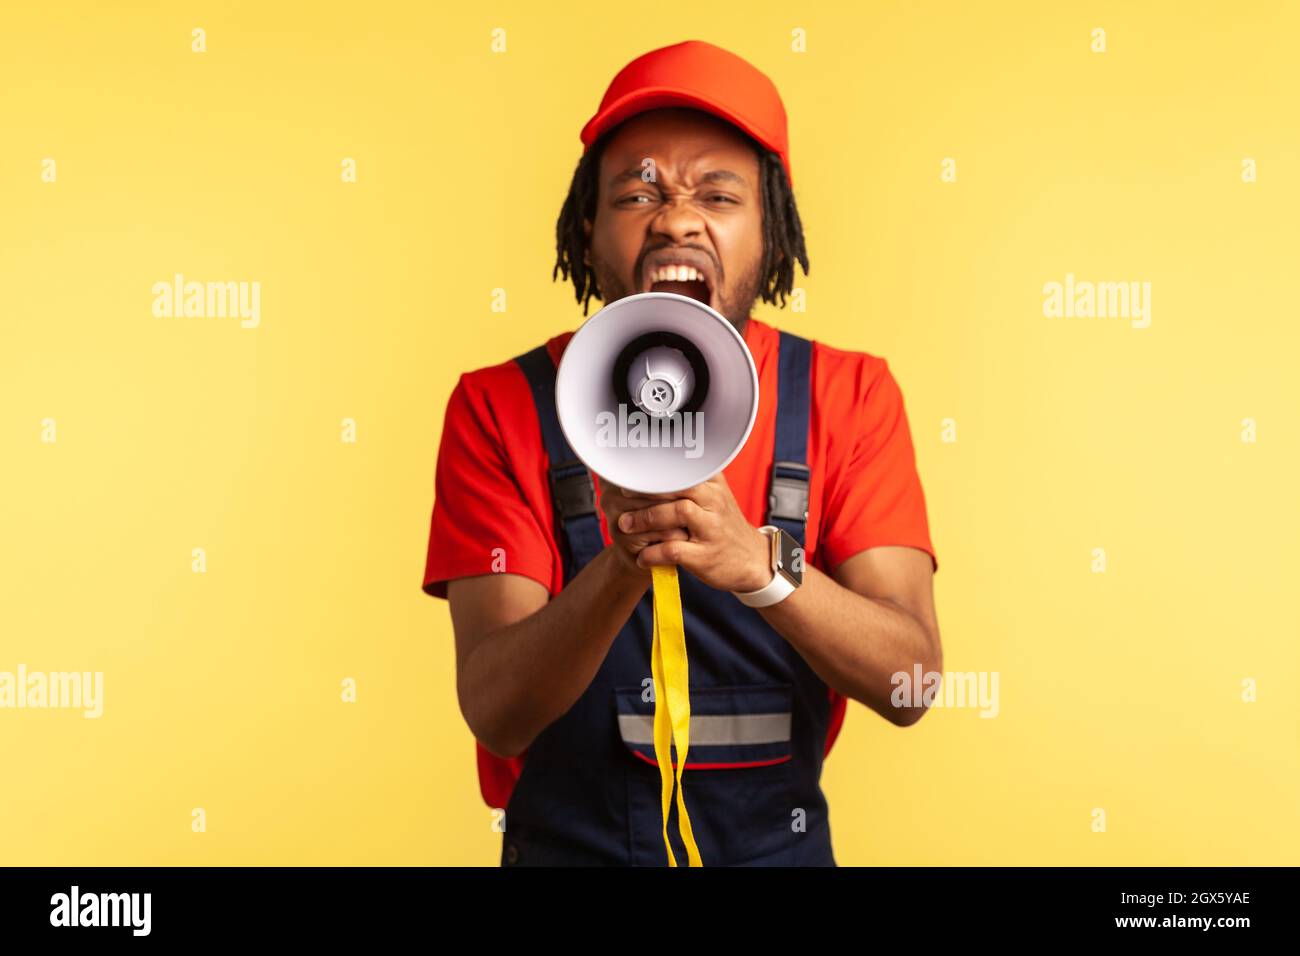 Portrait of angry bearded worker wearing red T-shirt and blue overalls holding megaphone and screaming with aggressive expression, protesting. Indoor studio shot isolated on yellow background. Stock Photo